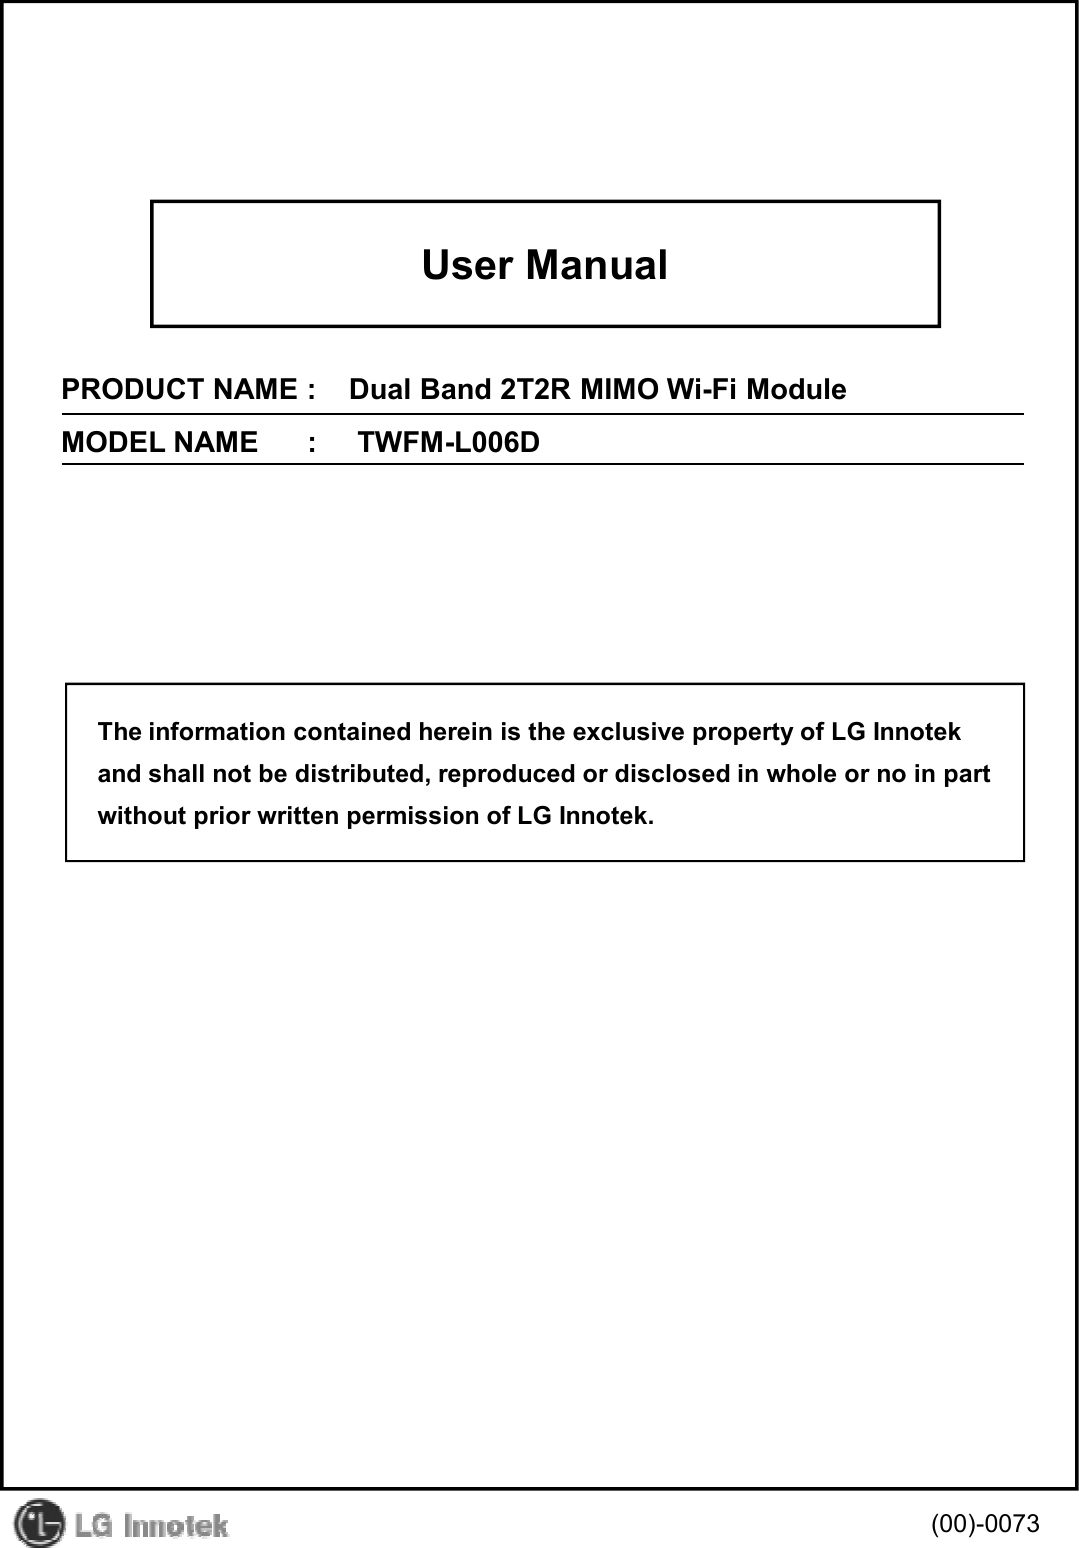 User ManualPRODUCT NAME :    Dual Band 2T2R MIMO Wi-Fi ModuleMODEL NAME      :     TWFM-L006D(00)-0073The information contained herein is the exclusive property of LG Innotekand shall not be distributed, reproduced or disclosed in whole or no in partwithout prior written permission of LG Innotek.